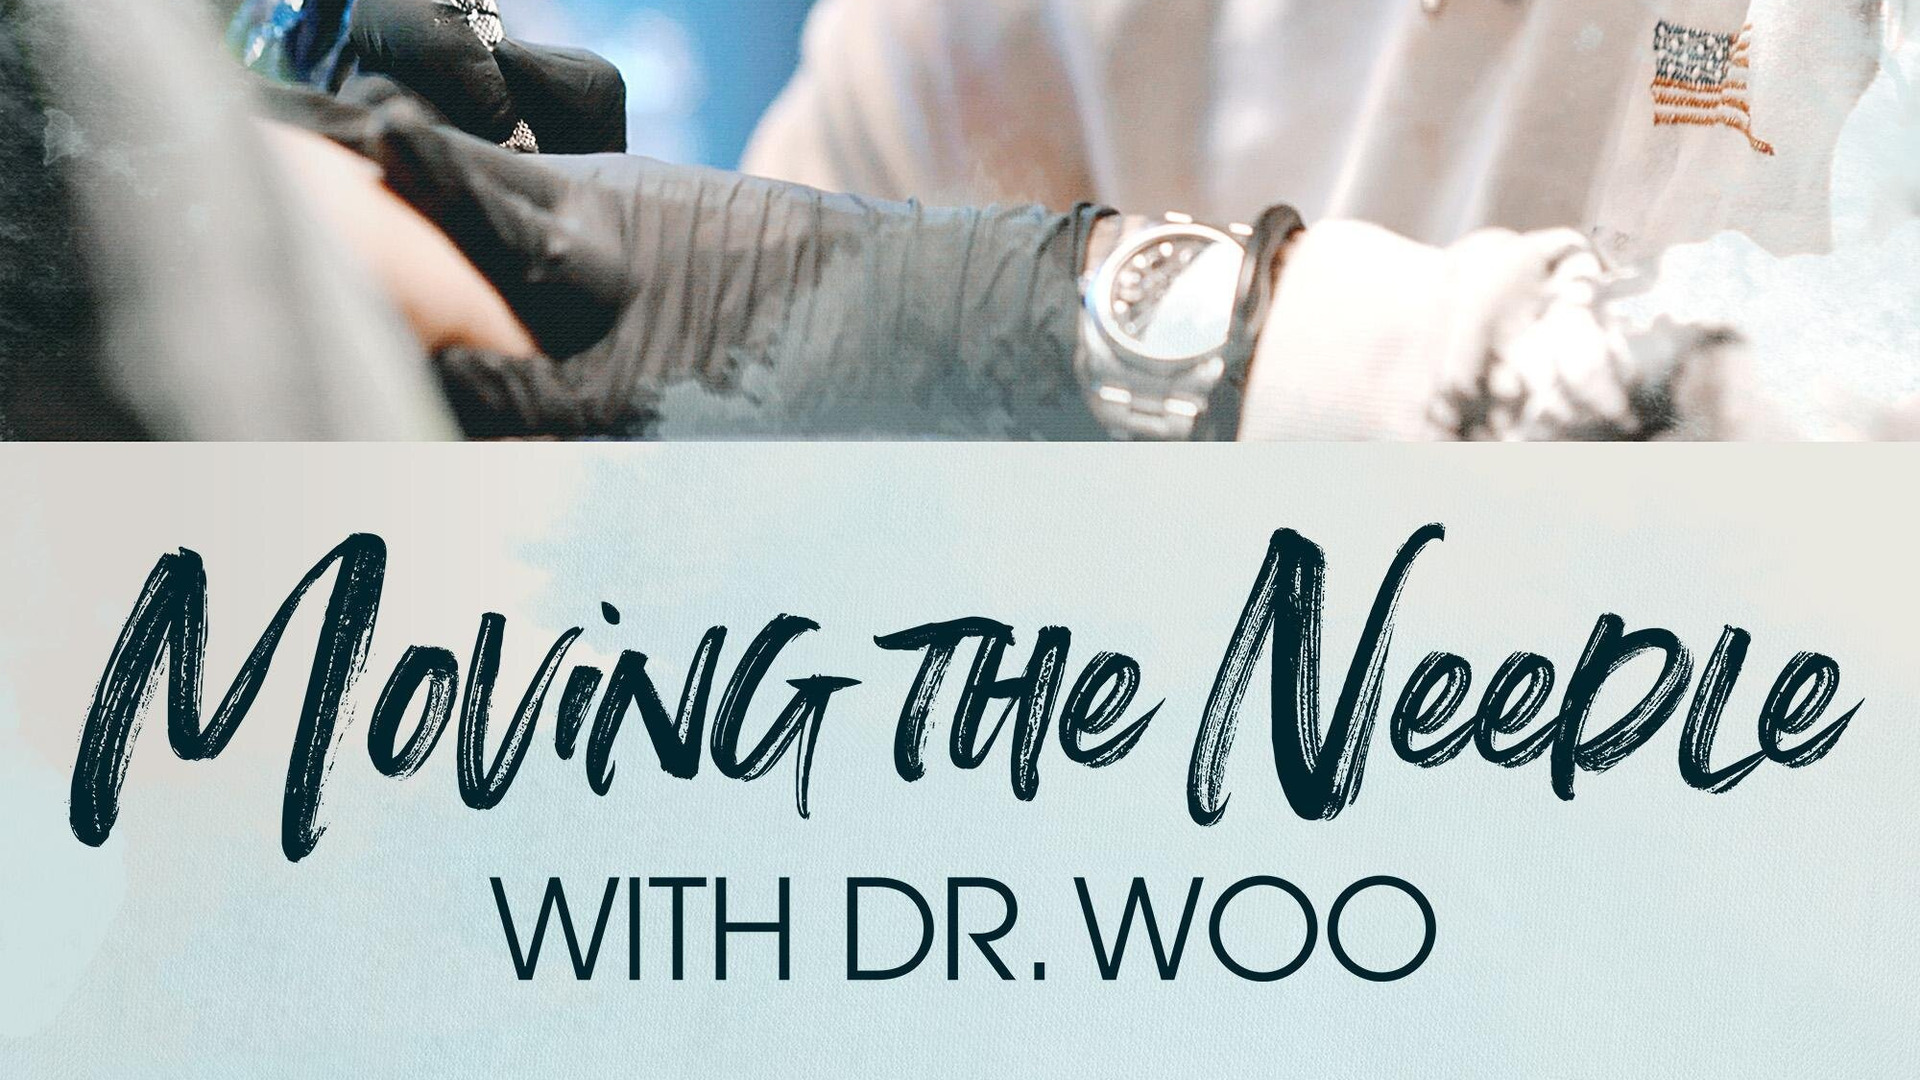 Show Moving the Needle with Dr. Woo